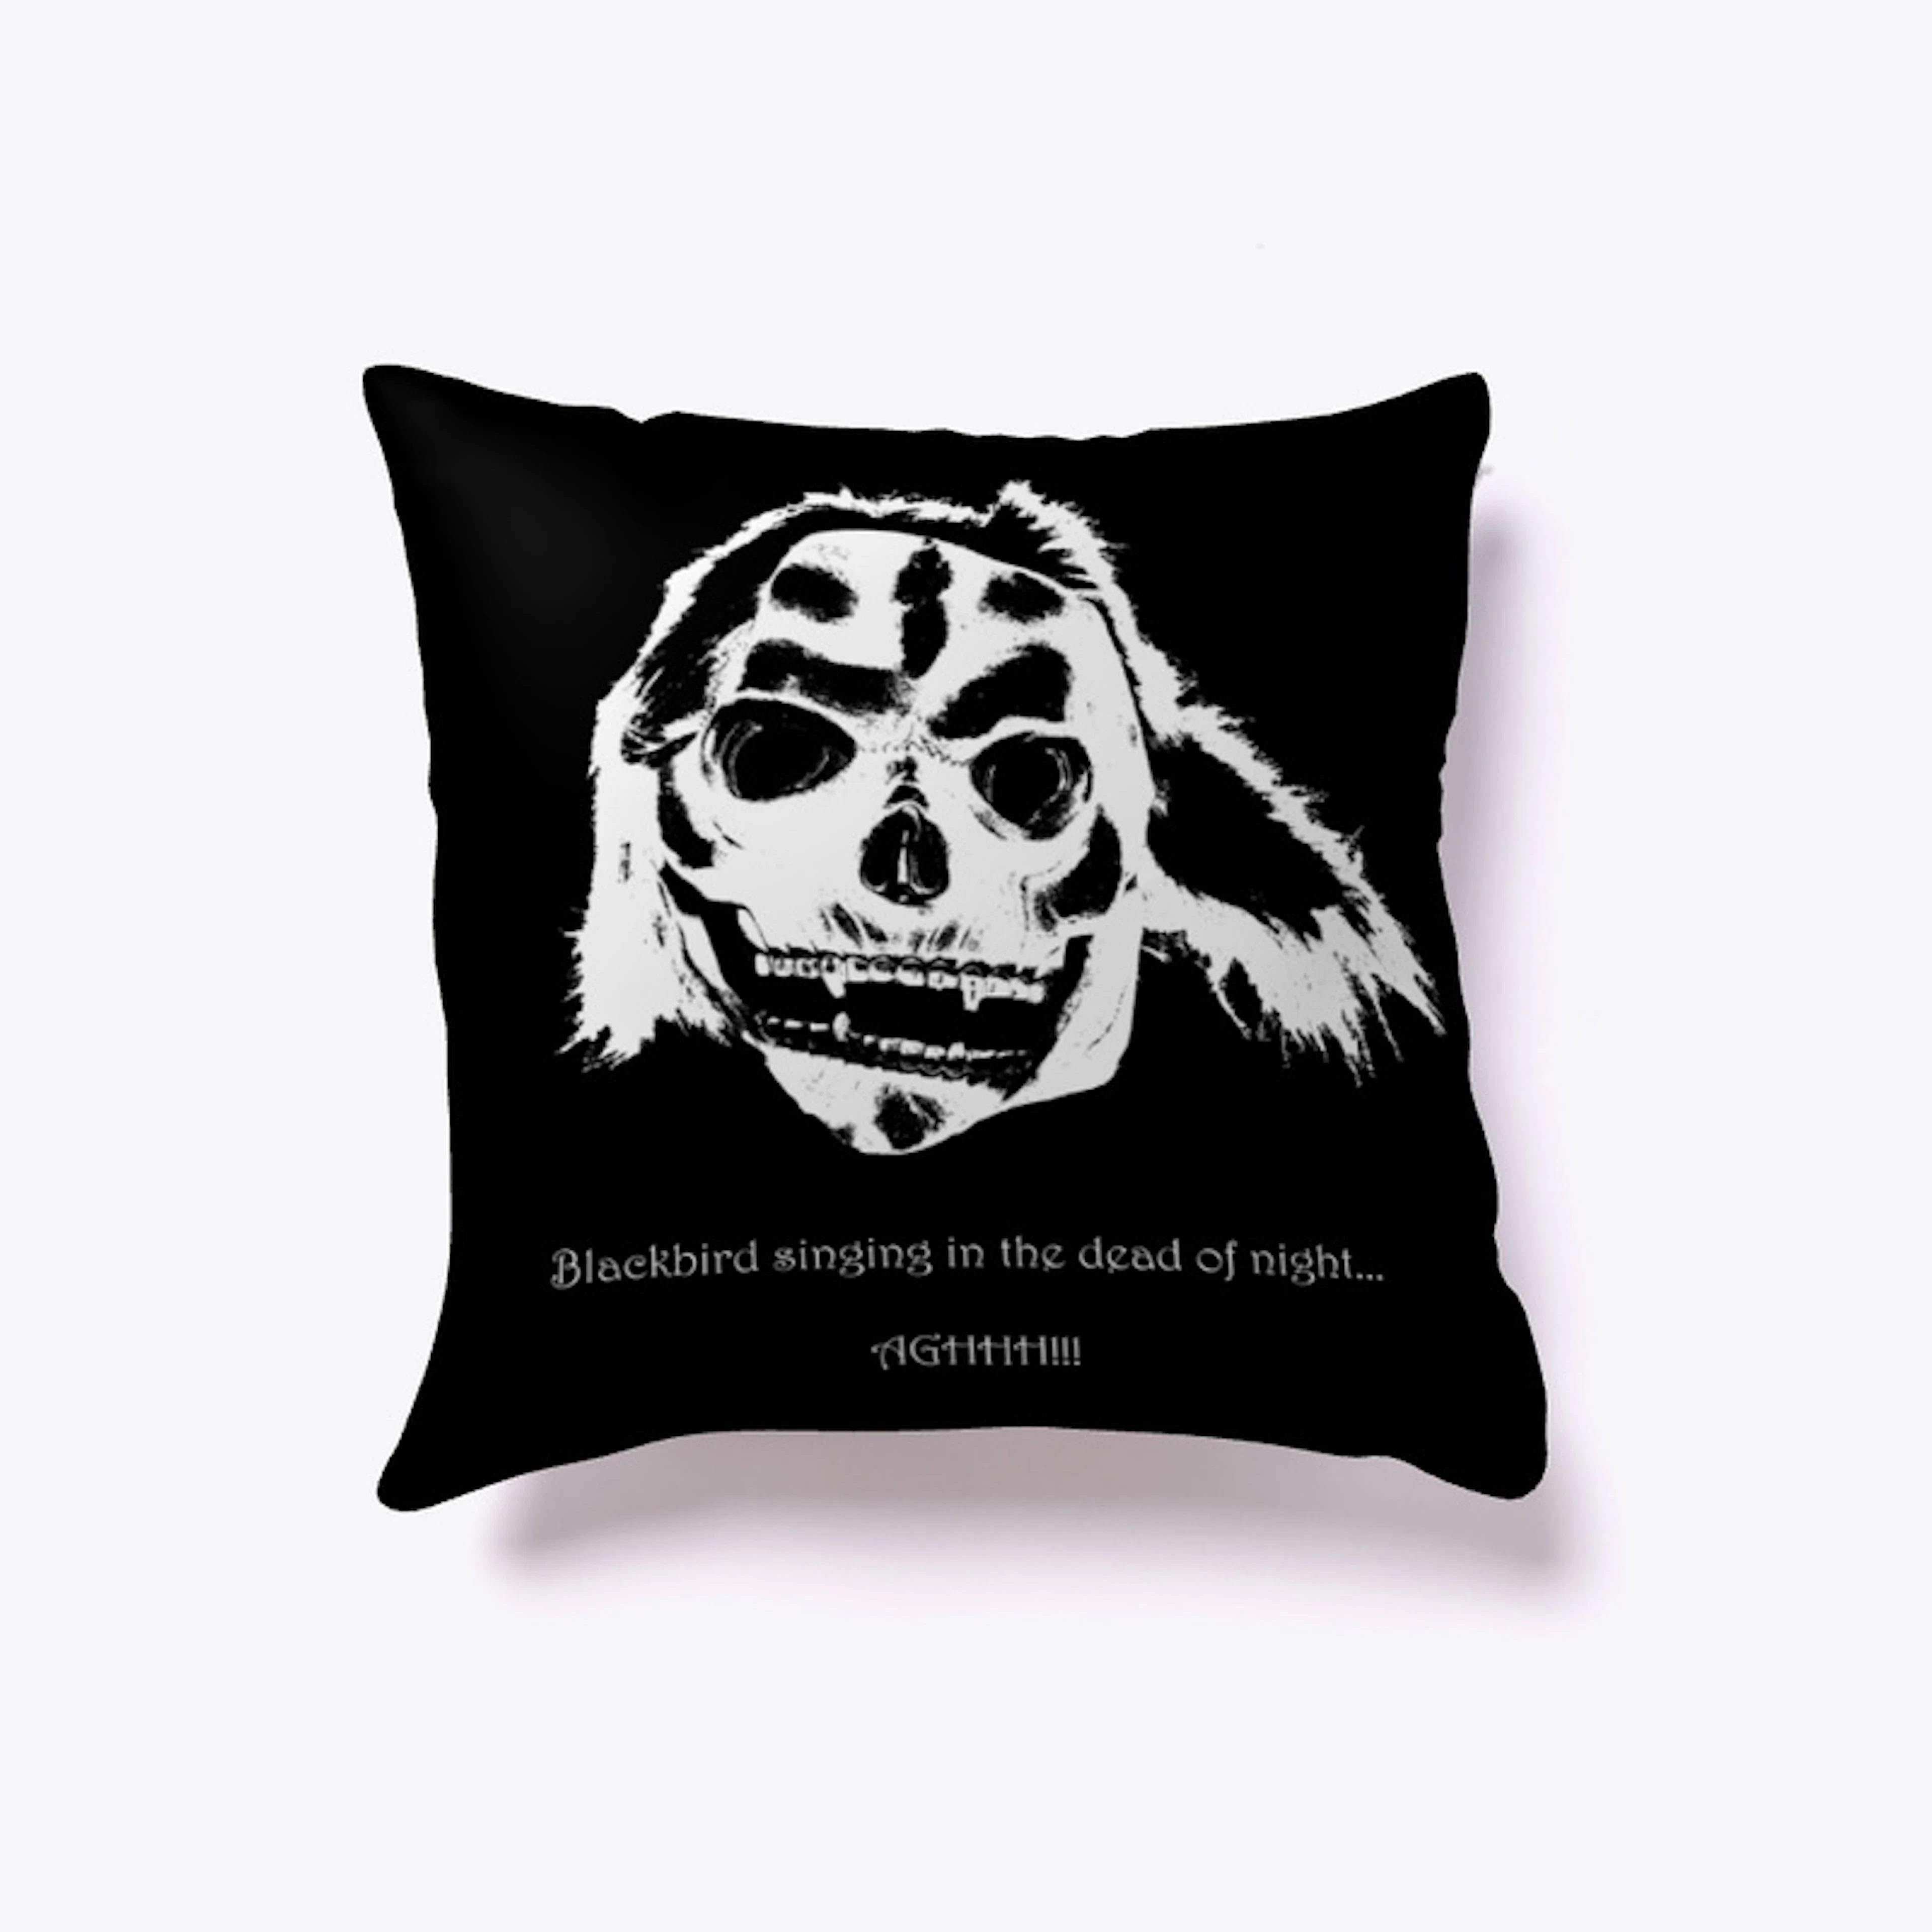 Jumpscare Mask Pillow with Subtext